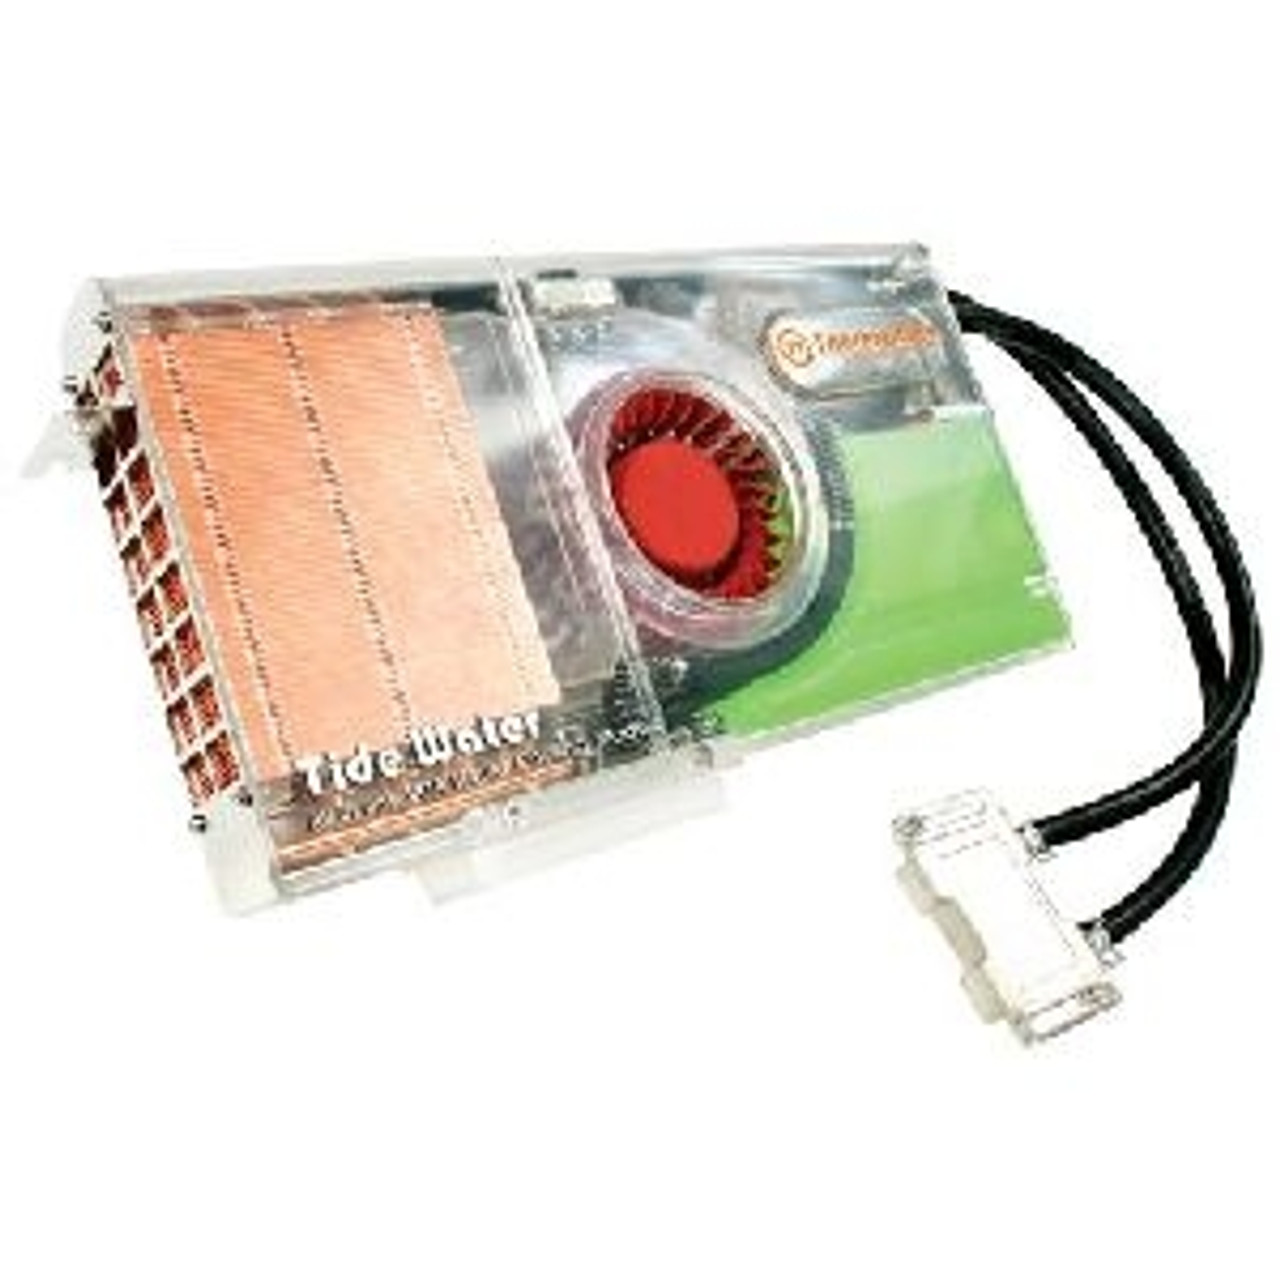 CL-W0052 Thermaltake Tide Water Liquid Cooling Module For VGA